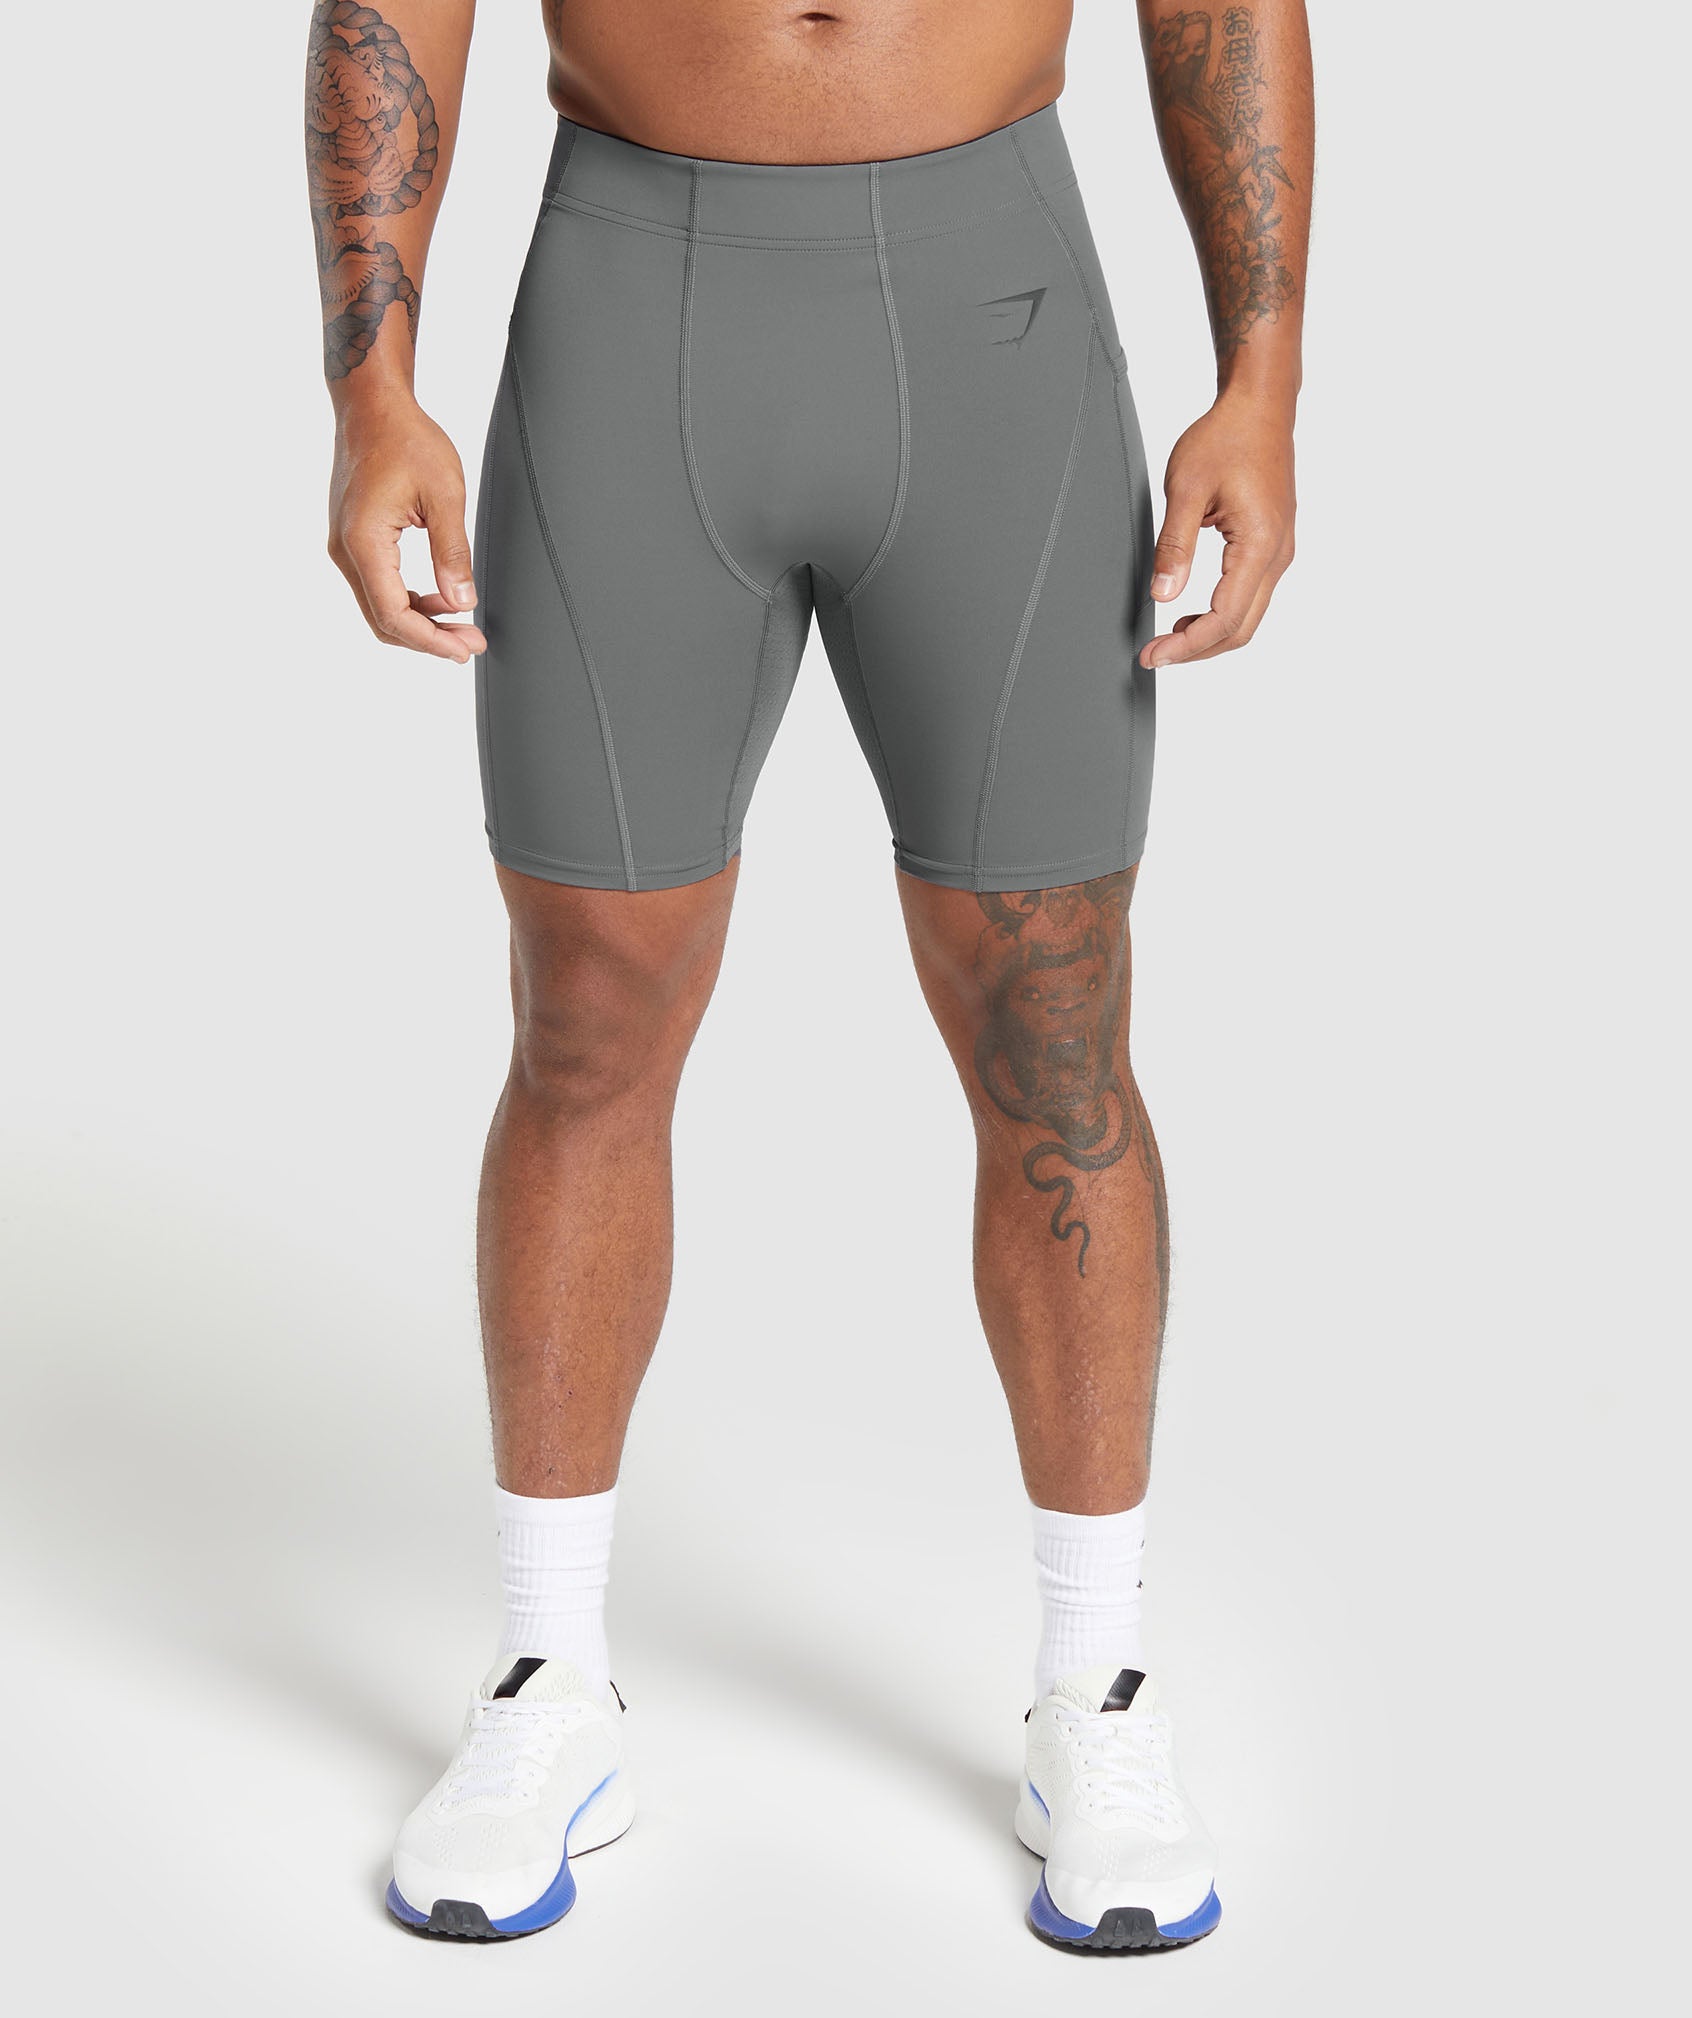 Control Baselayer Shorts in {{variantColor} is out of stock